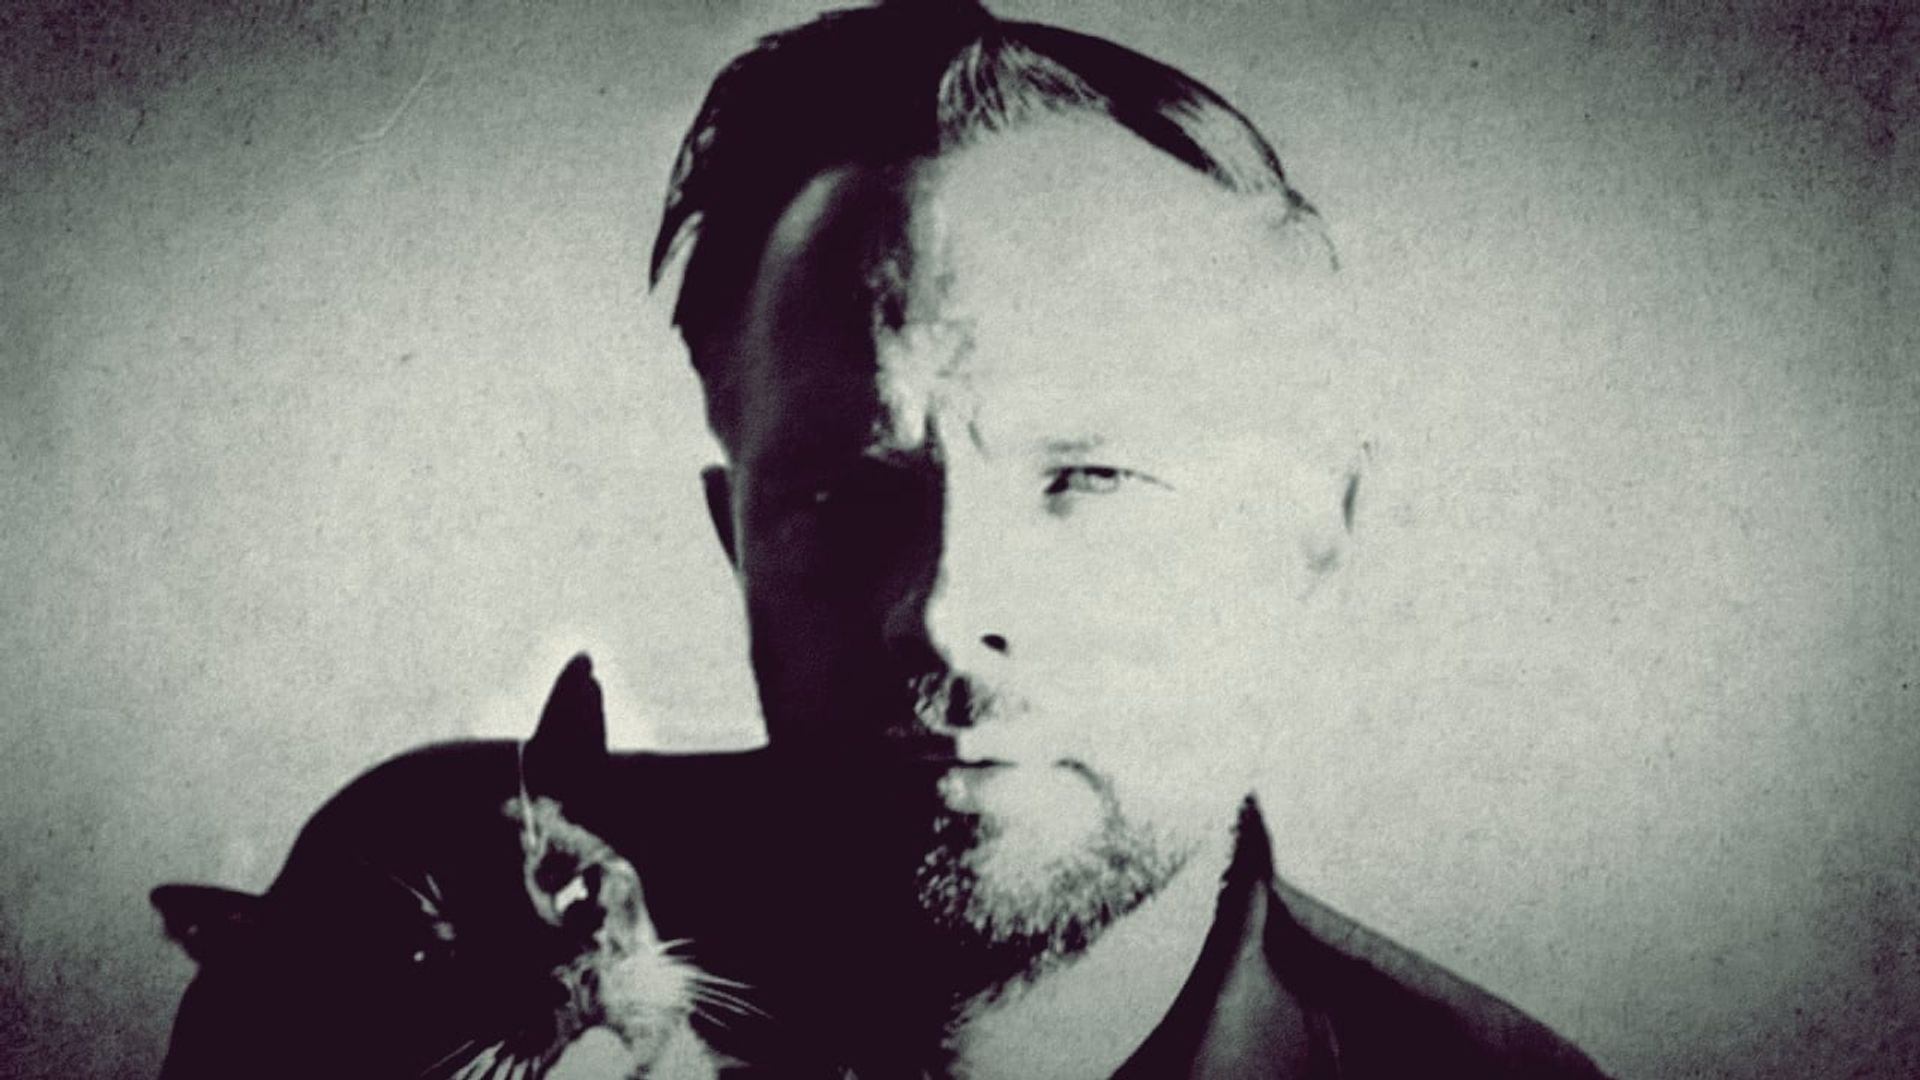 The Worlds of Philip K. Dick background